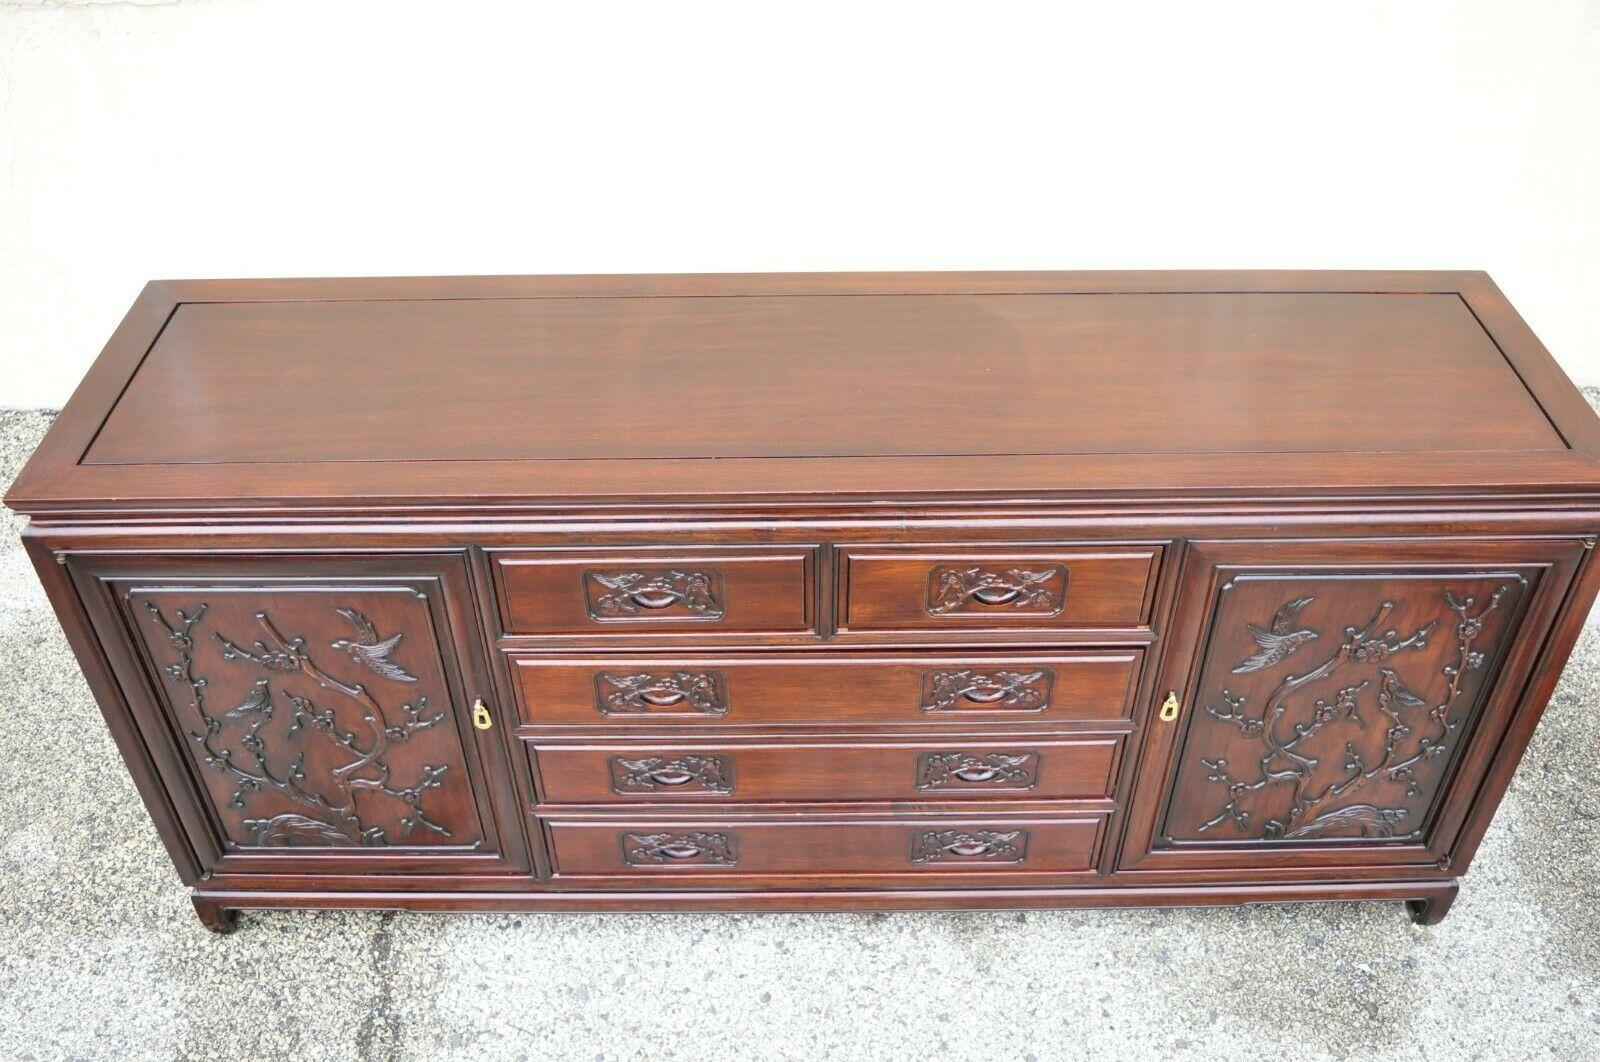 20th Century Vintage Chinese Bird Carved Mahogany Hardwood Buffet Sideboard Server Credenza